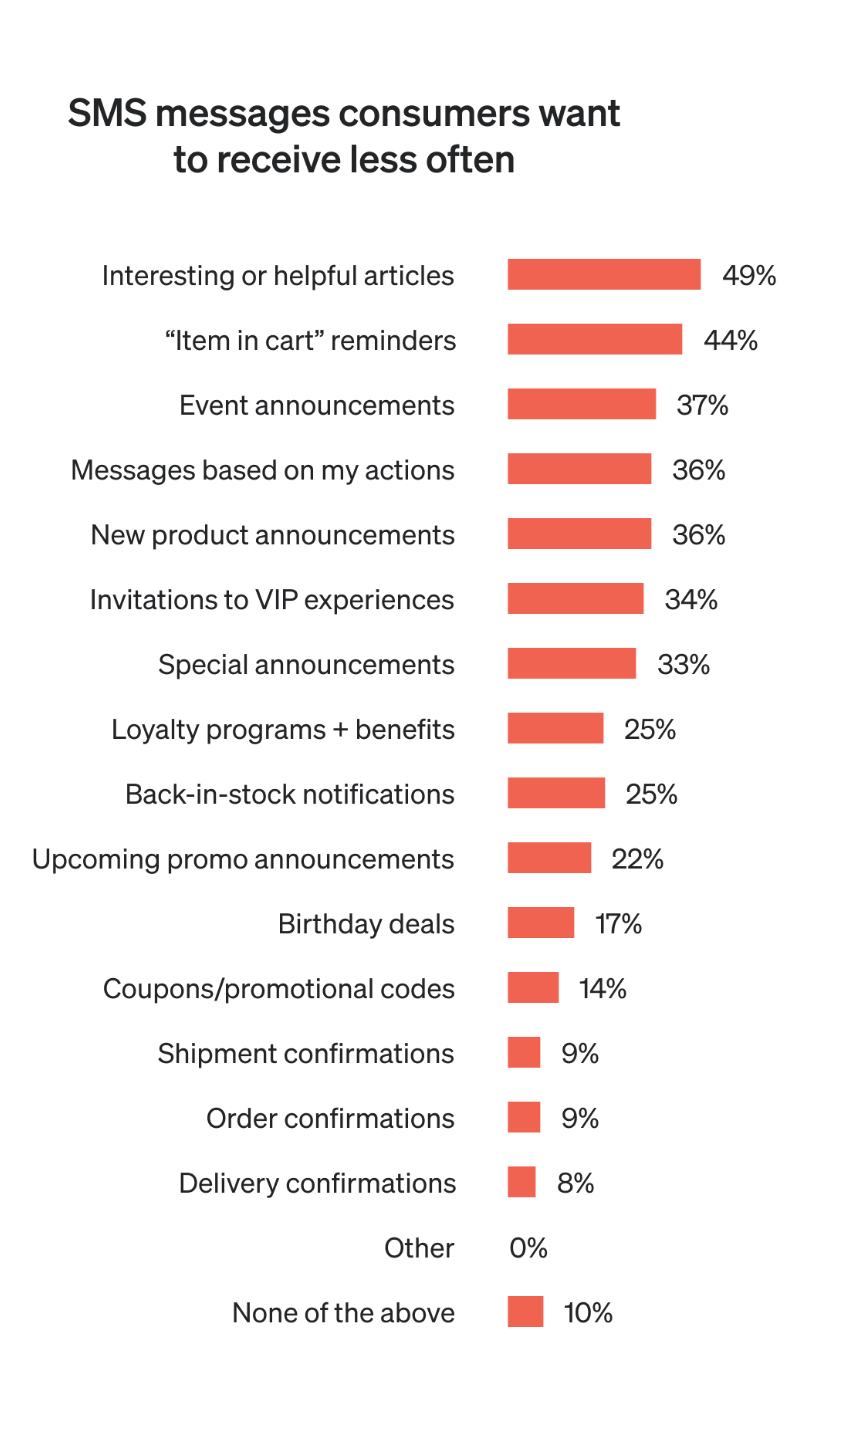 Image shows a chart indicating which types of SMS messages consumers want to receive less often.